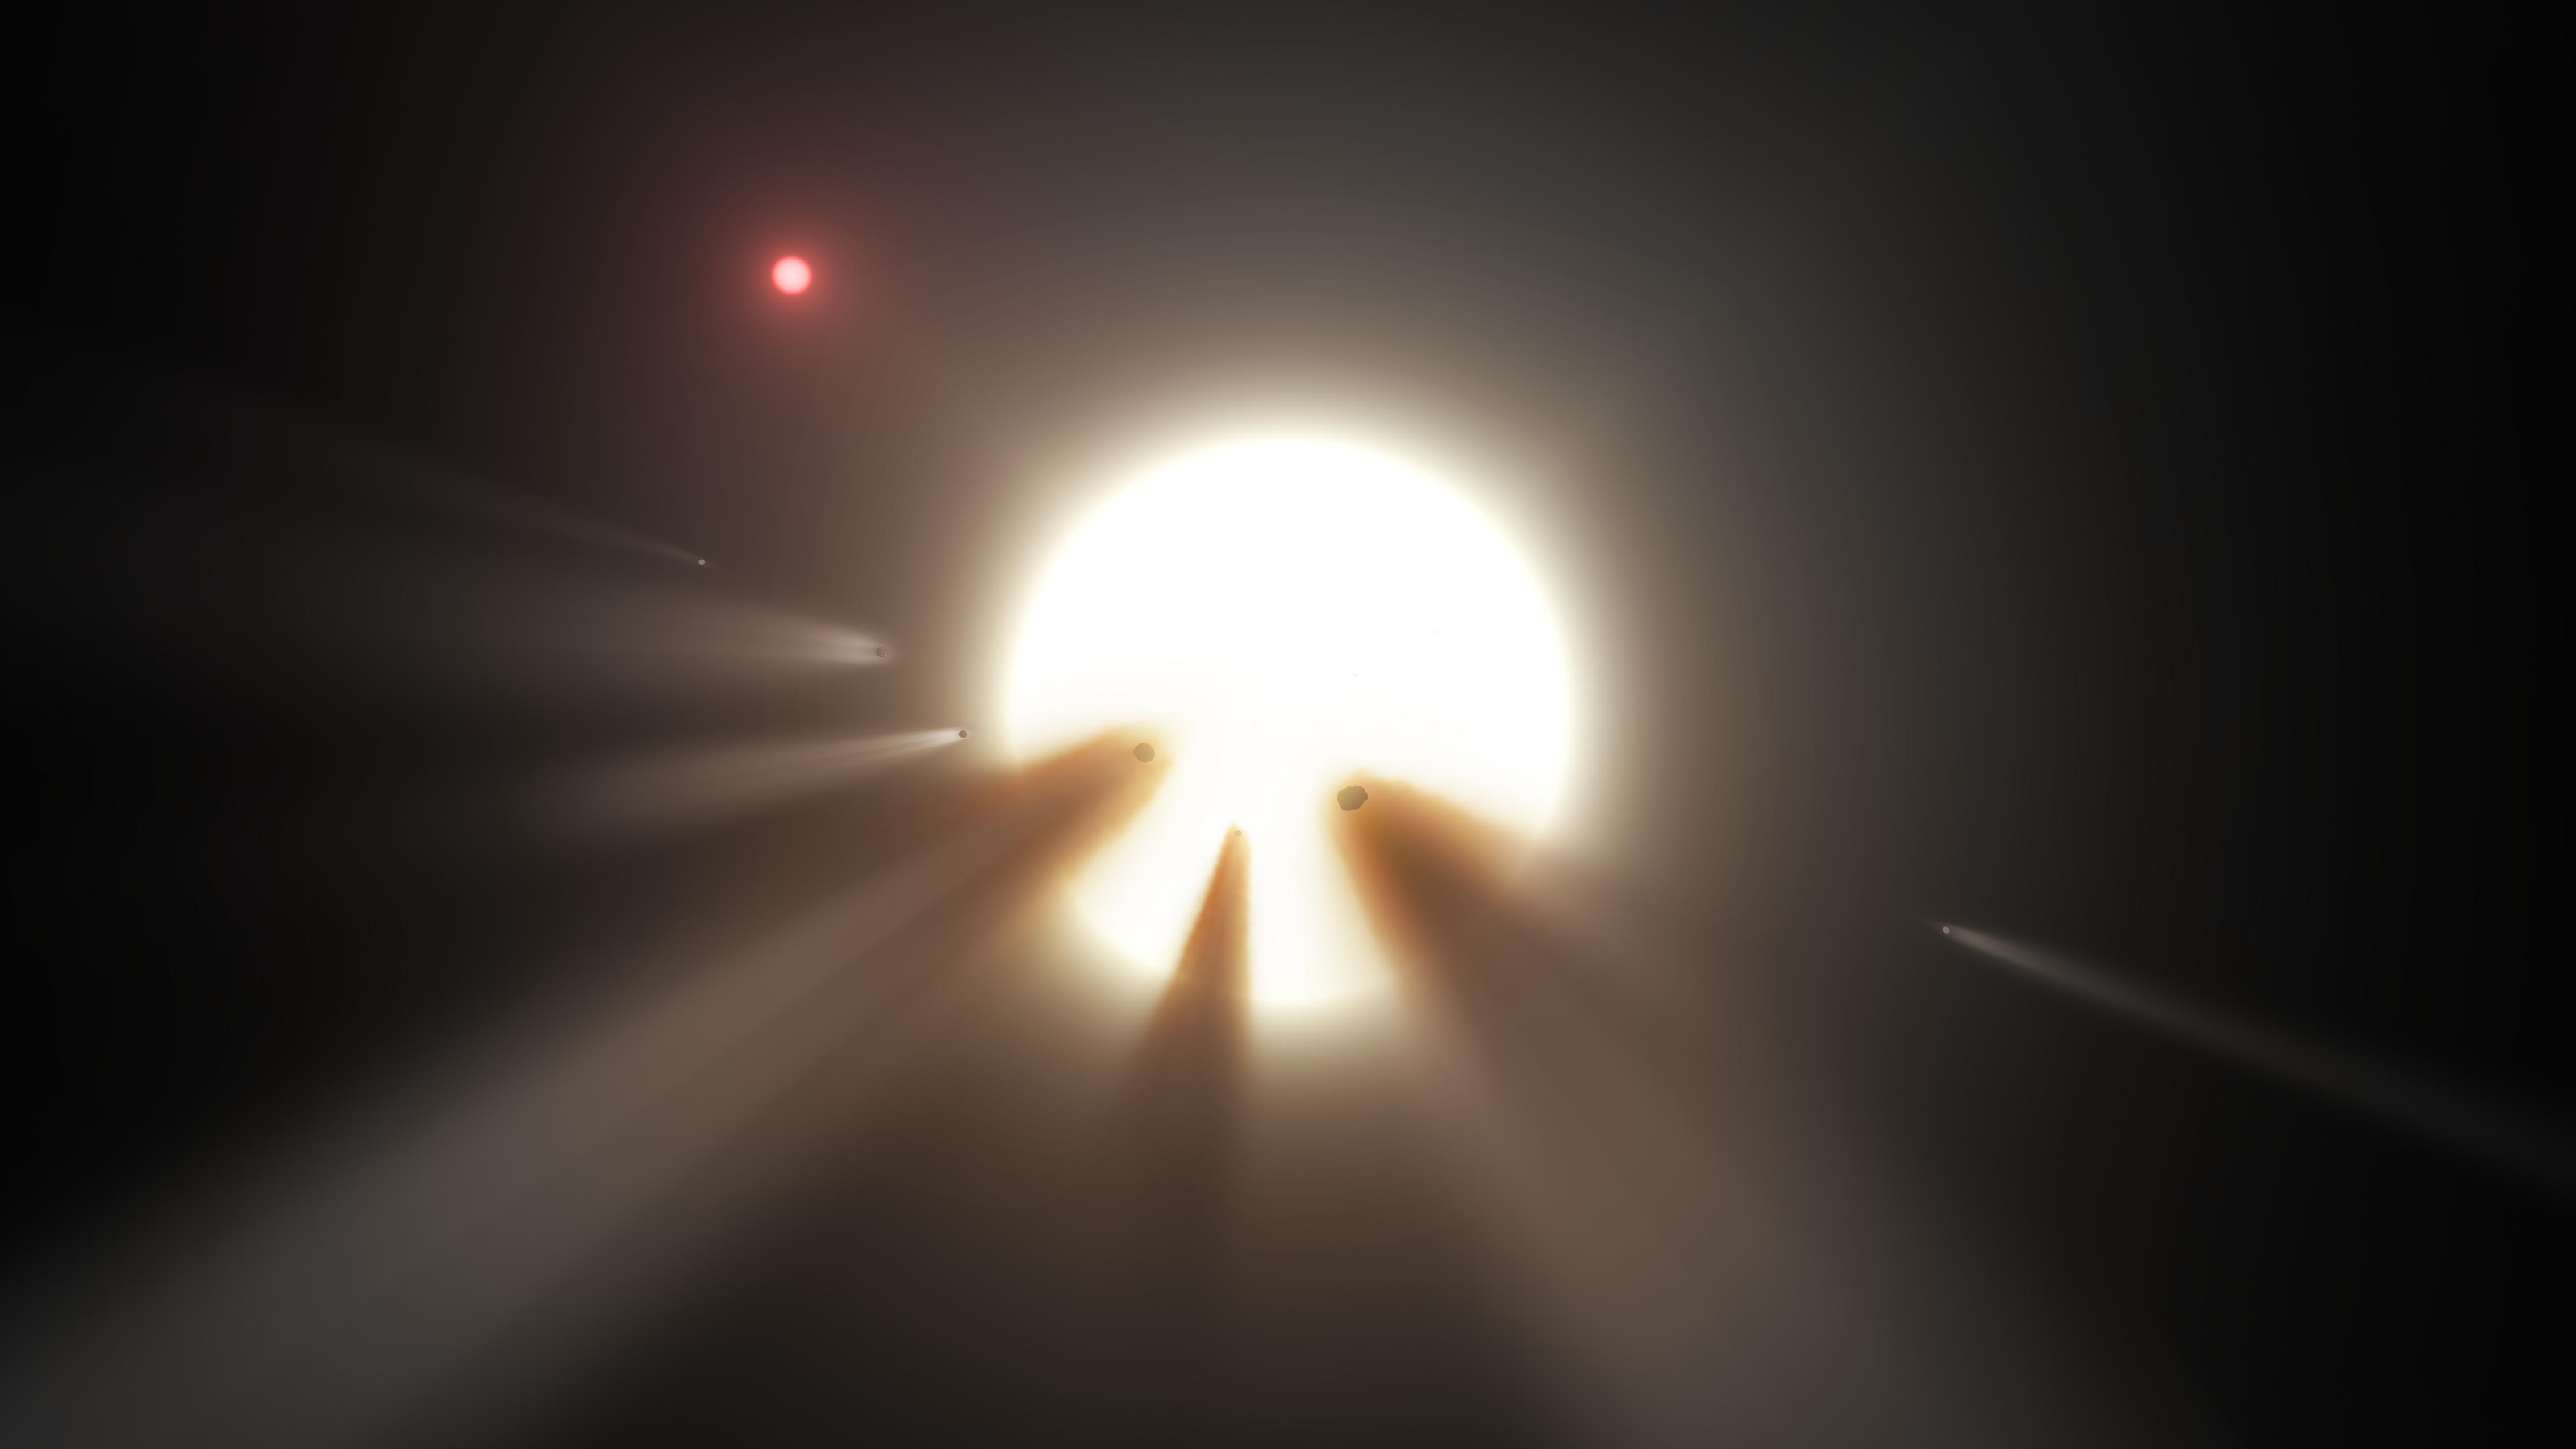 illustration of comet and dust debris blocking thie light from a star